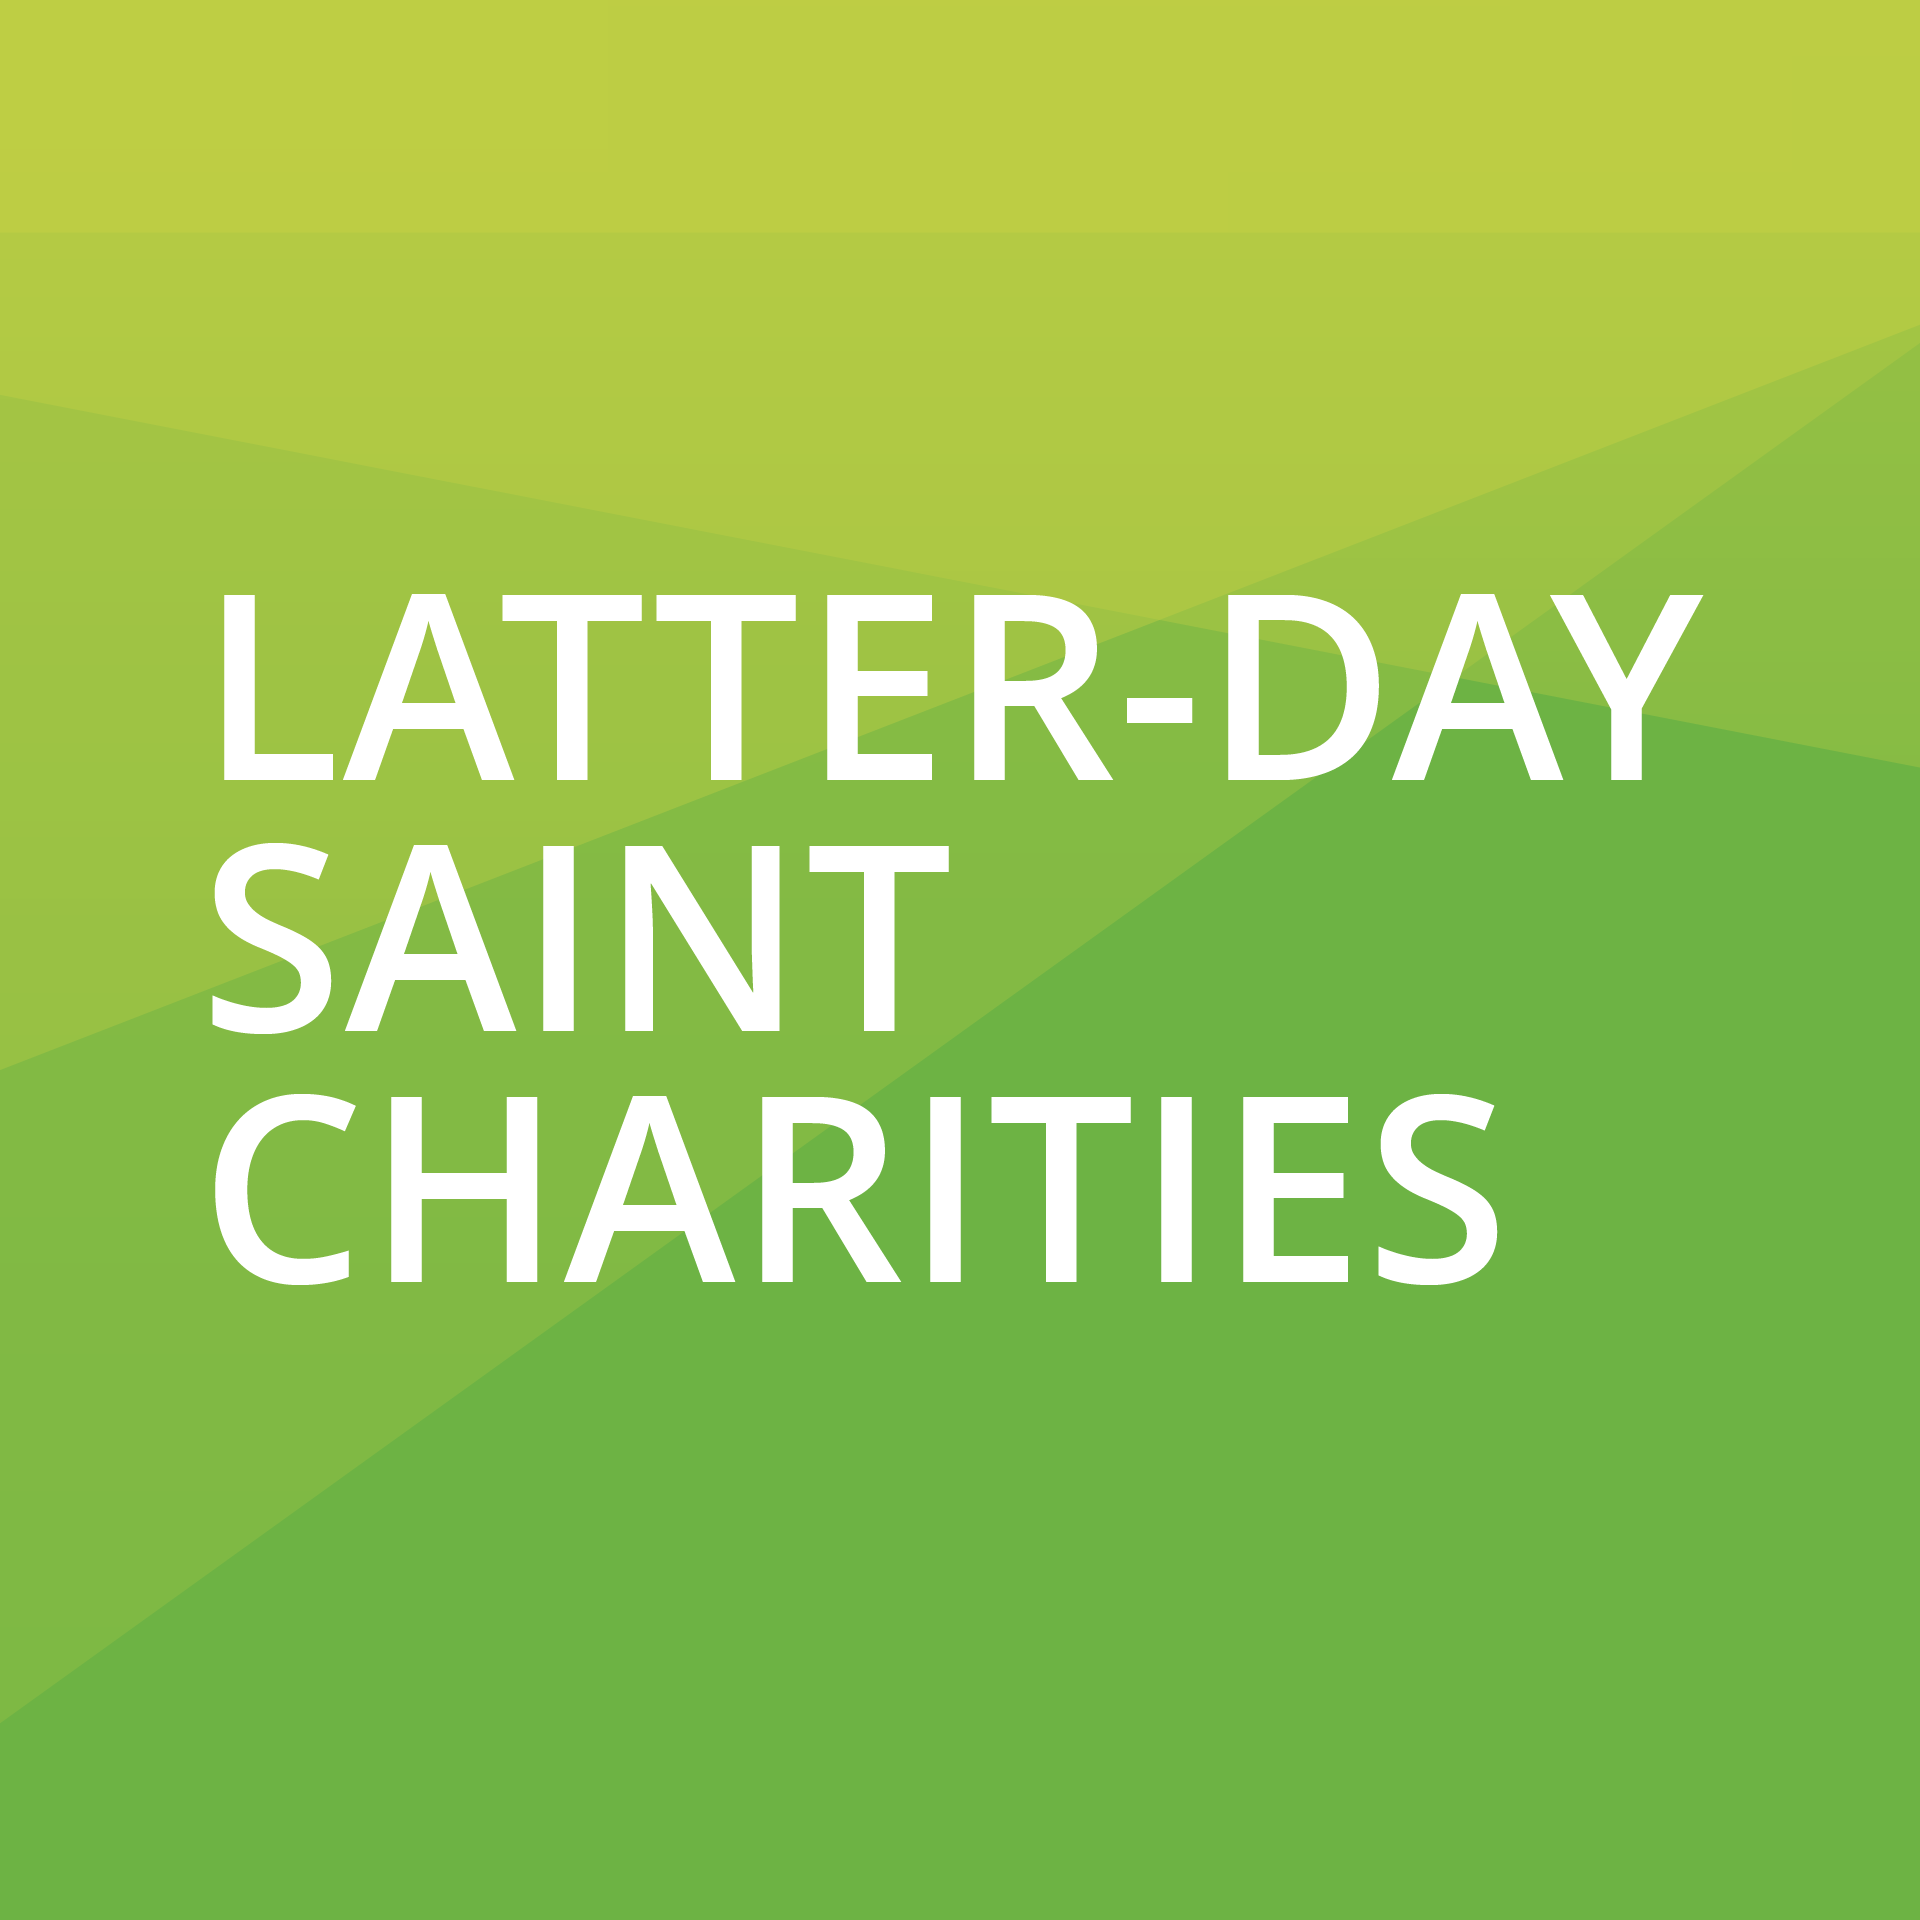 Latter-day Saint Charities Partners with the Archdiocese of Milwaukee and Milwaukee County in Wisconsin to Provide Transitional Housing for the Homeless